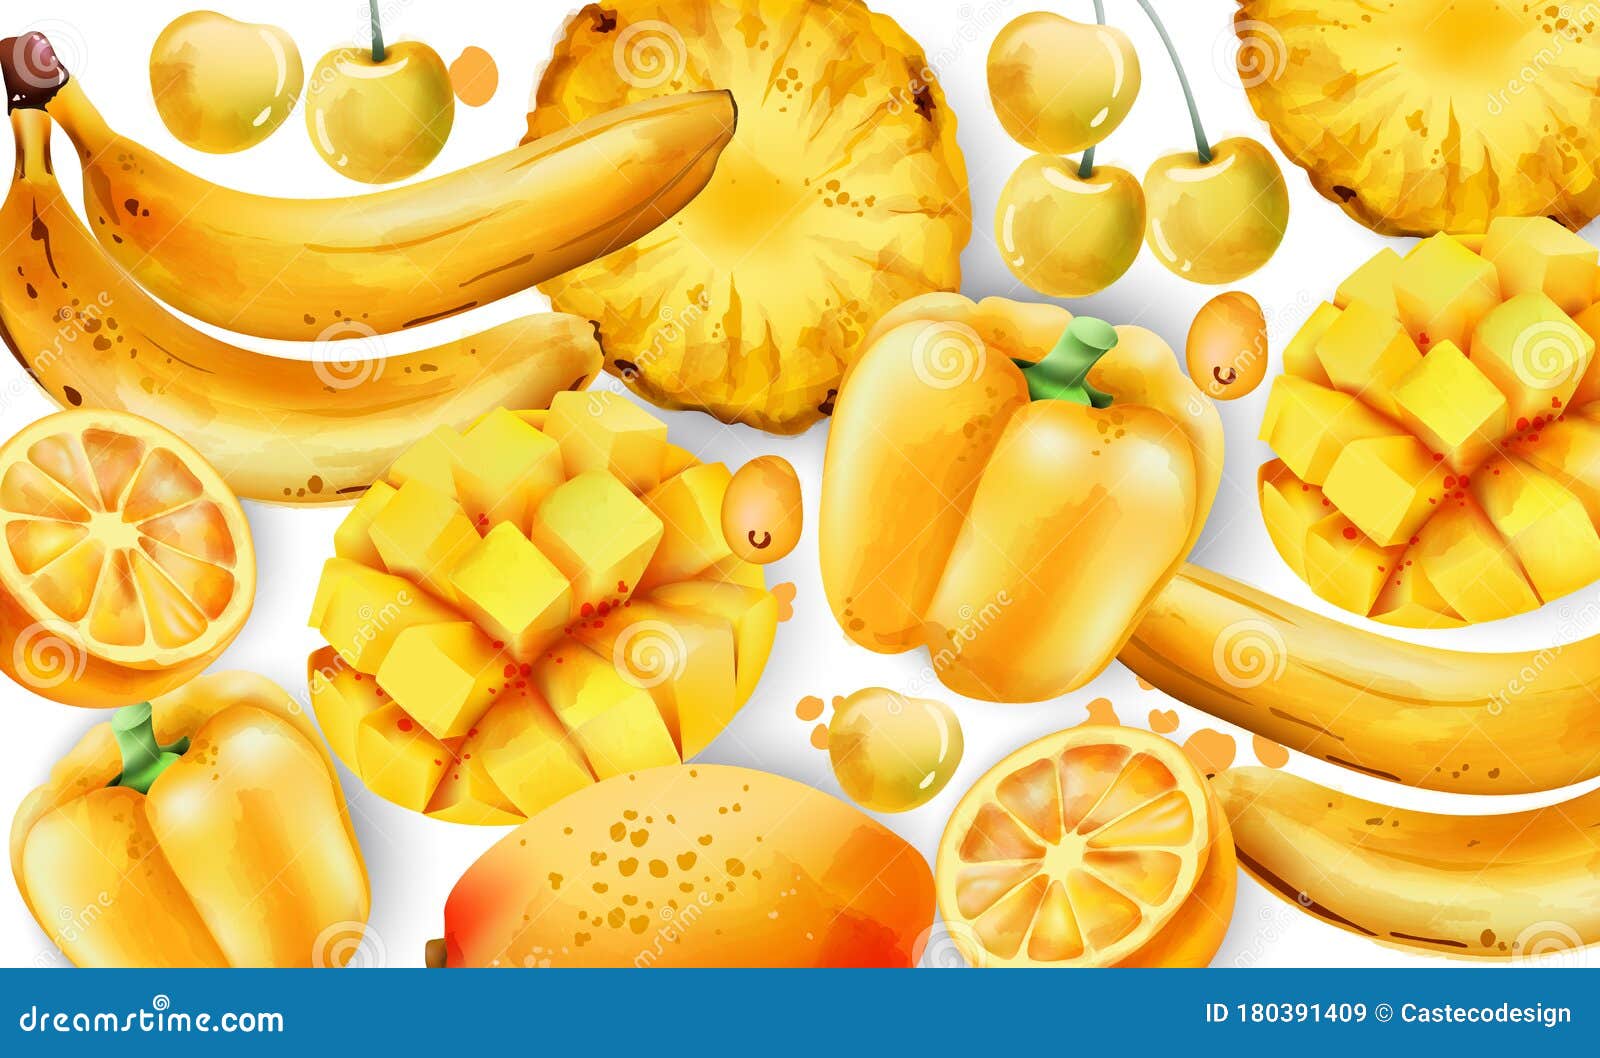 Composition Of Yellow Fruits And Vegetables. Mango, Bell Pepper, White ...